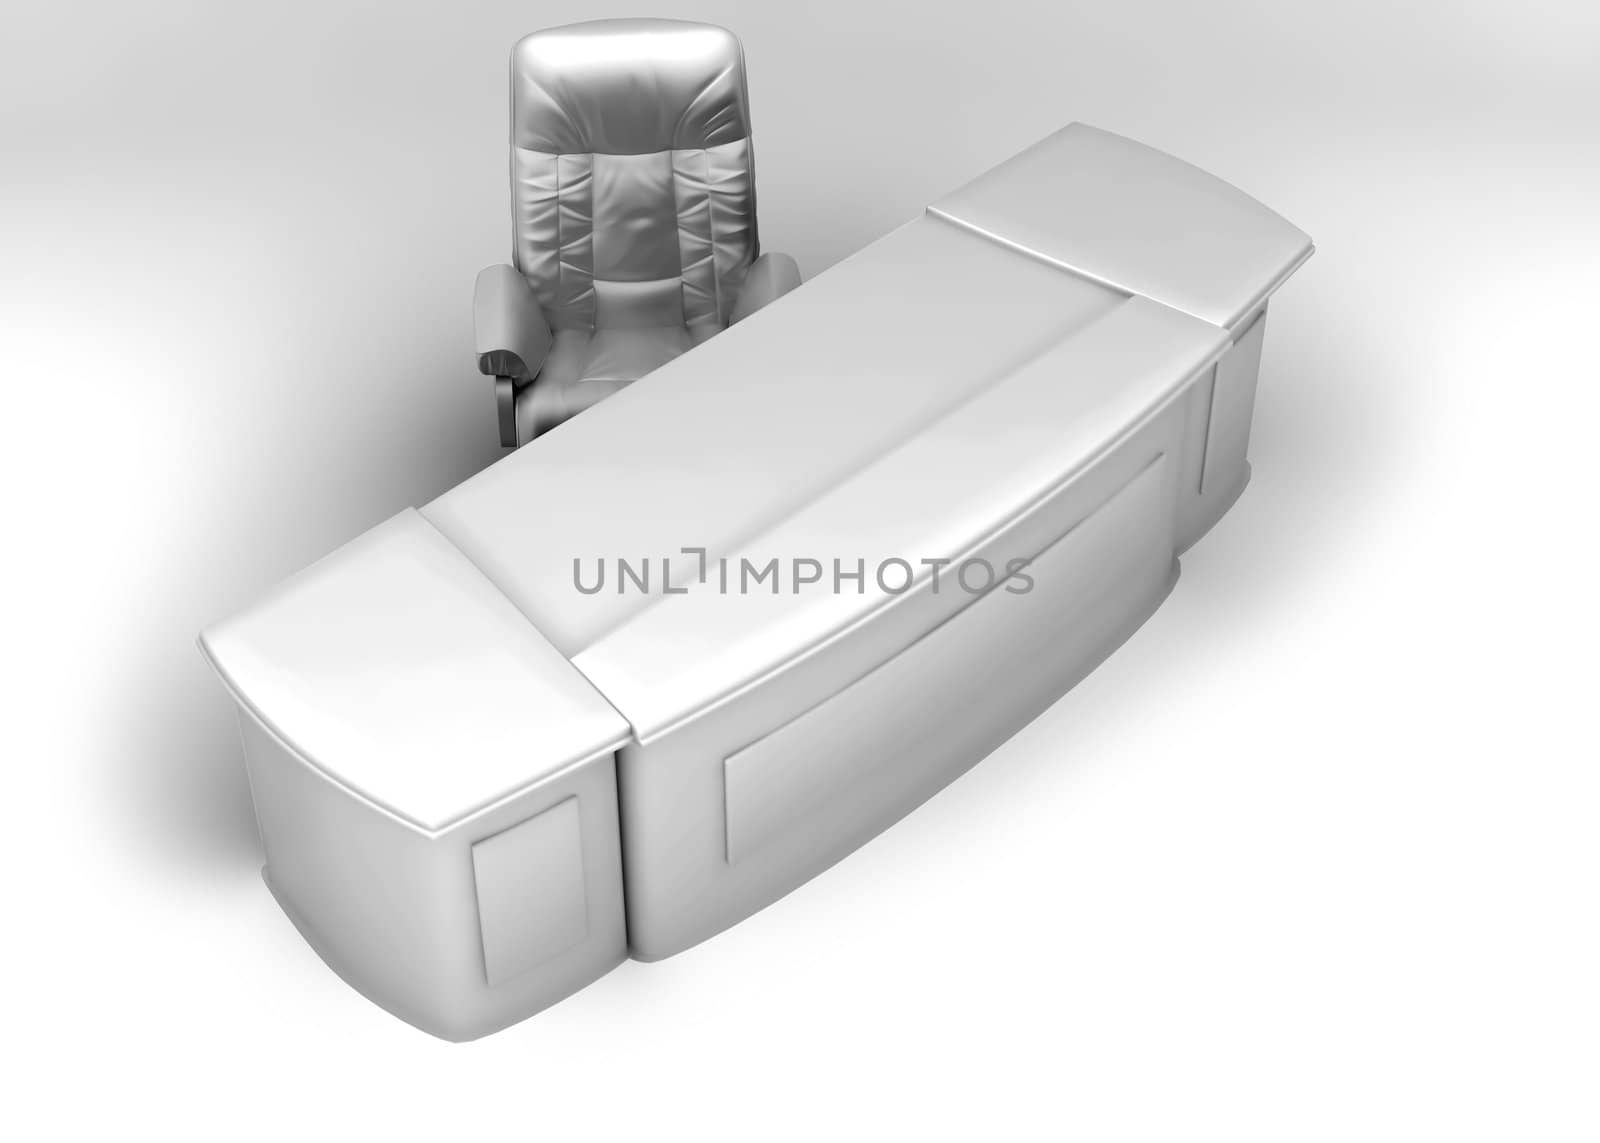 table and armchair on a white background executed in a high key